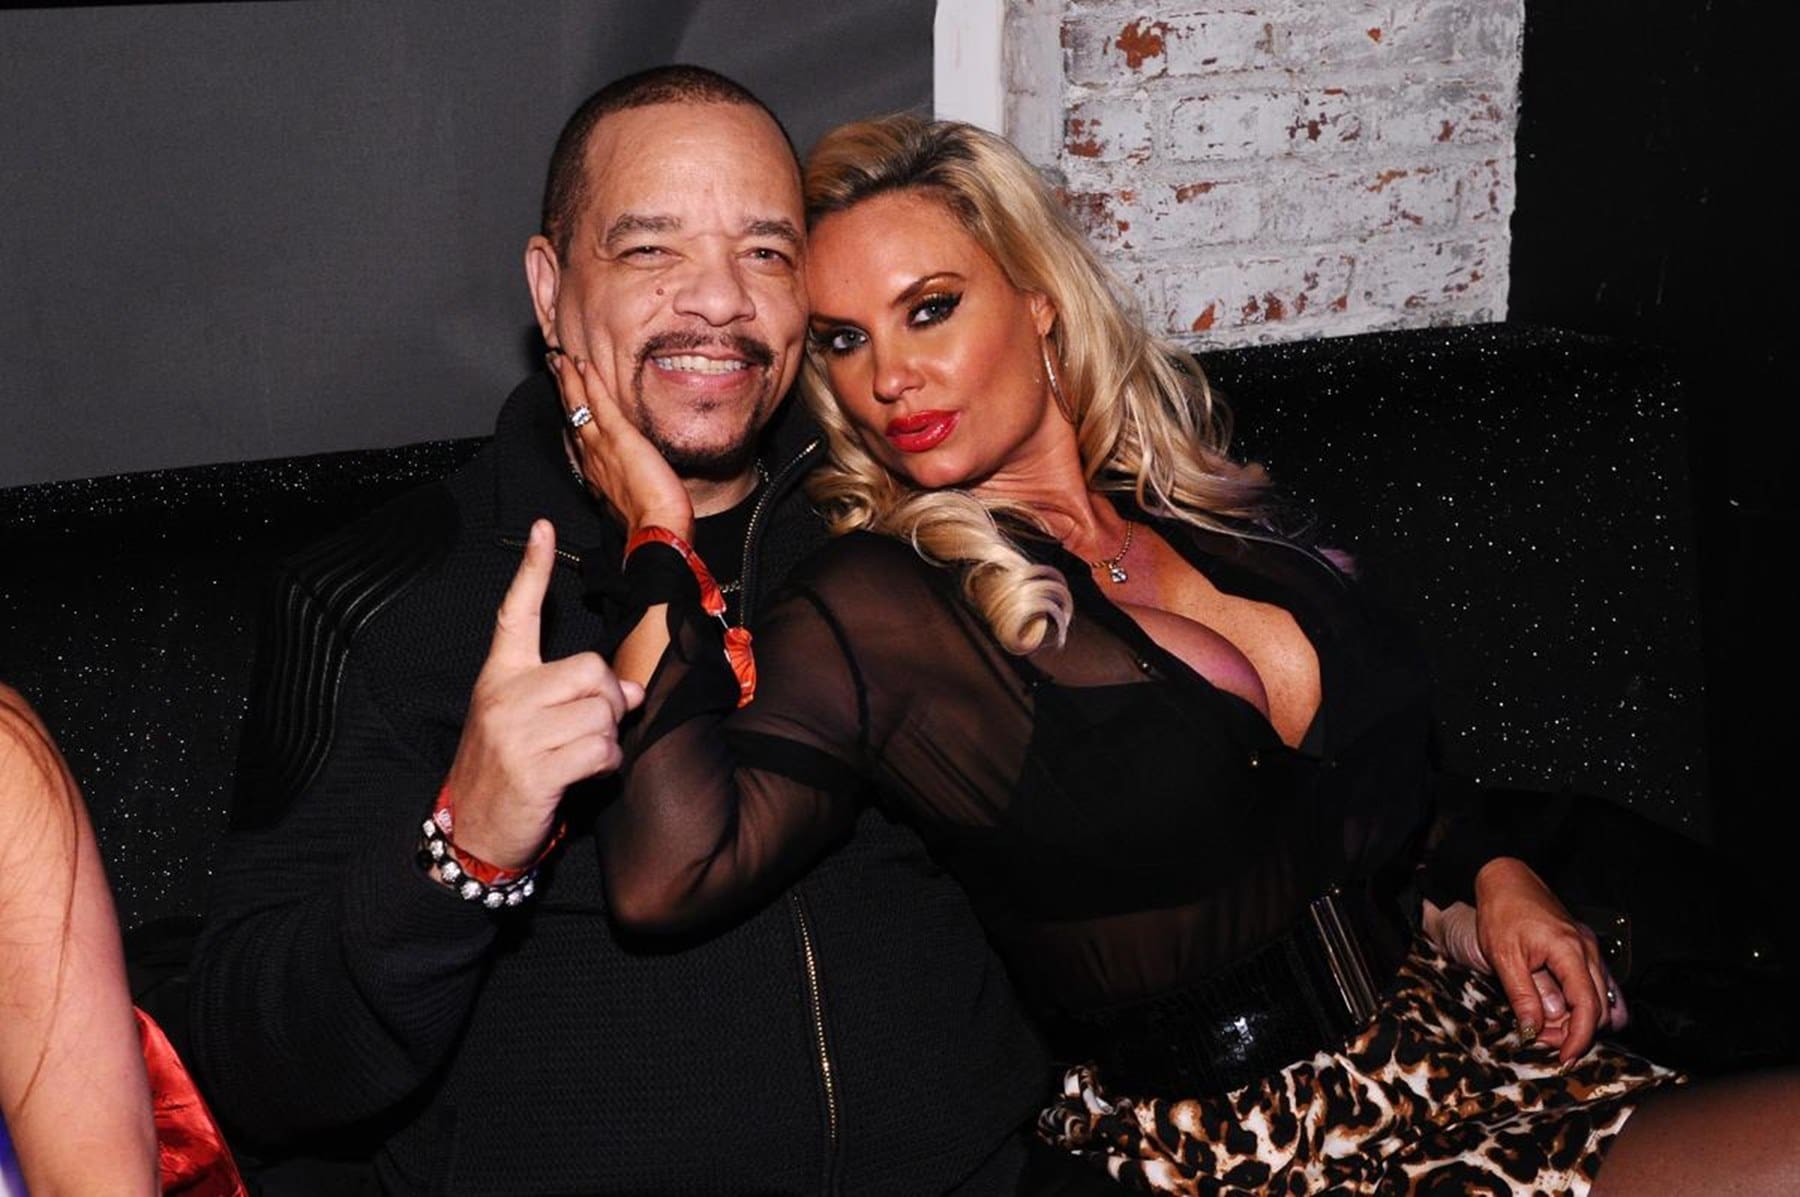 Ice-T 's Wife Coco Austin Daughter Chanel